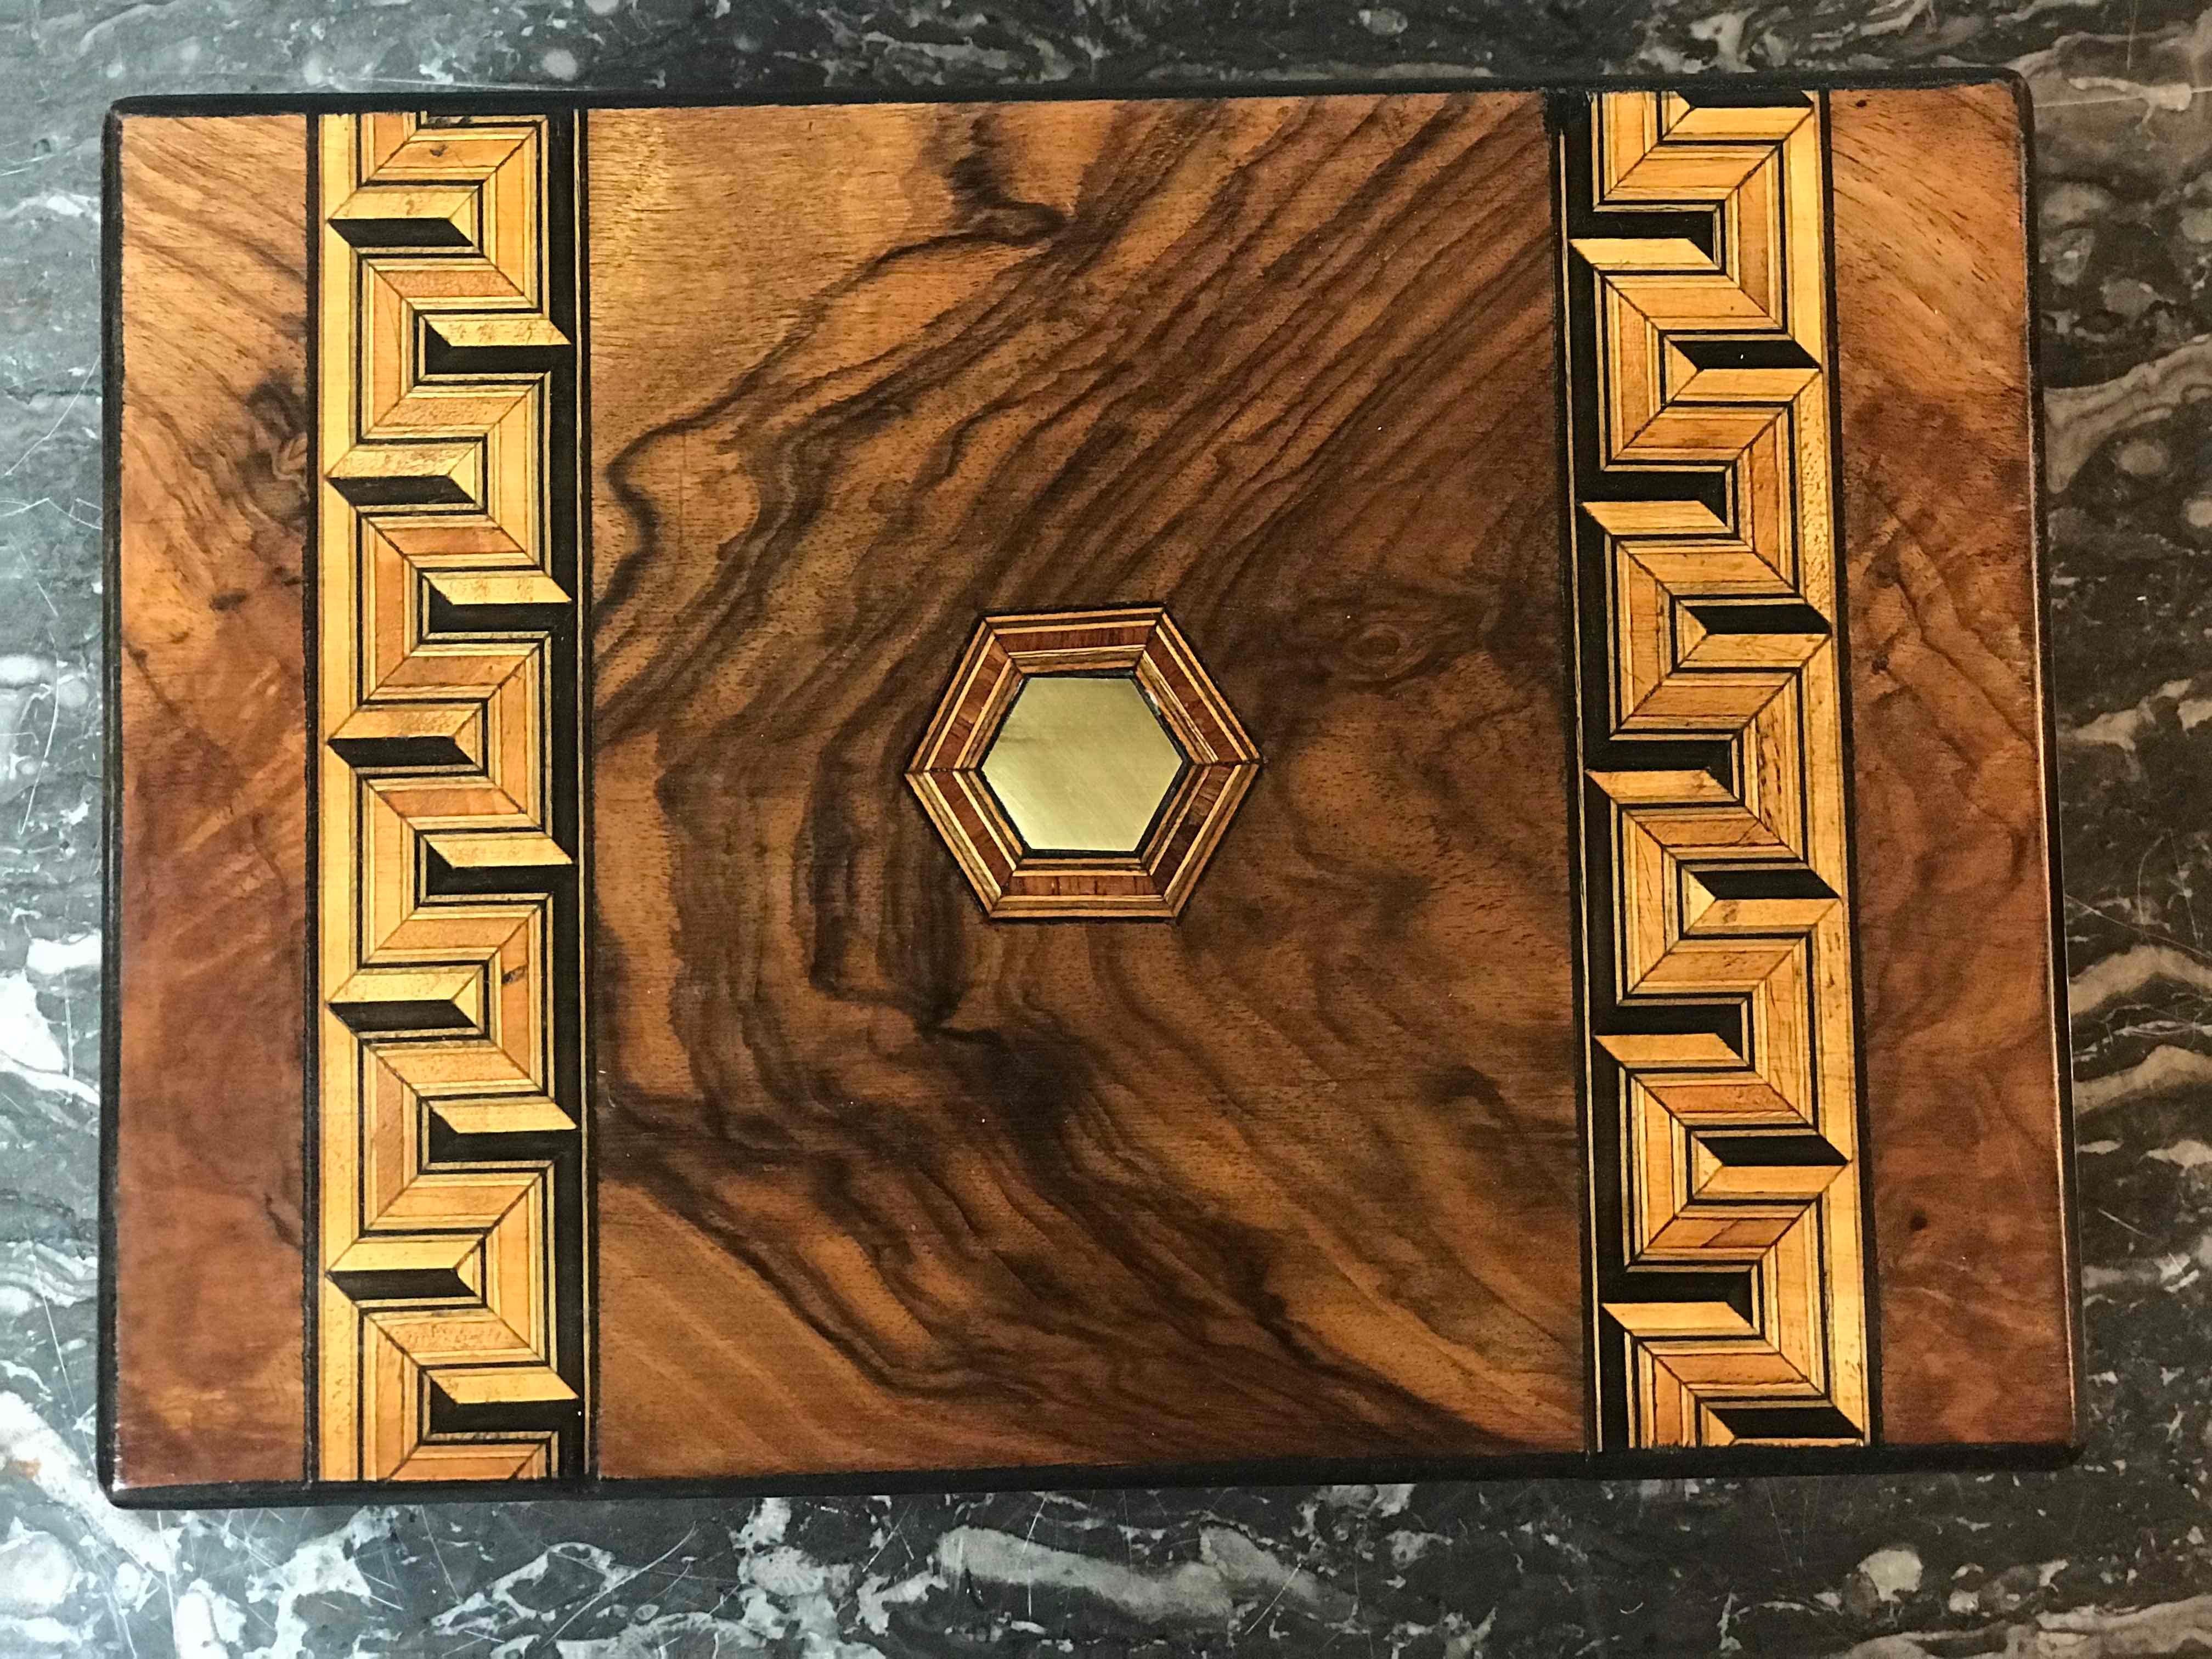 Late Victorian Inlaid Walnut Box from Late 19th Century England